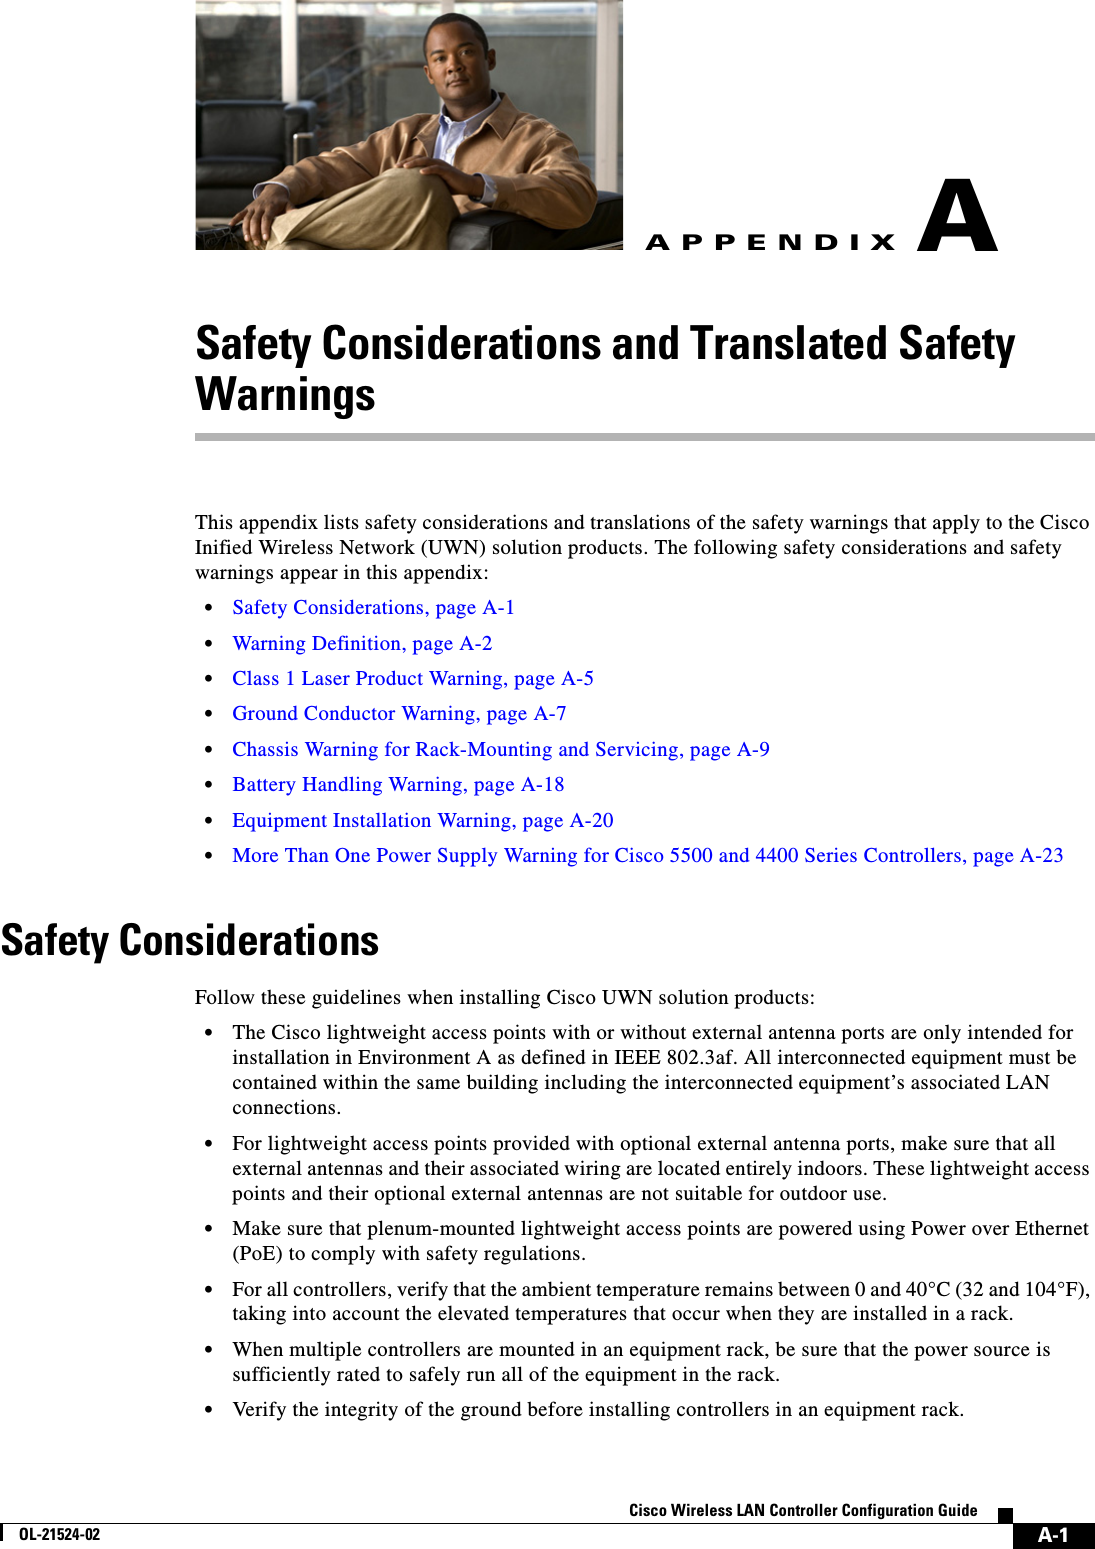  A-1Cisco Wireless LAN Controller Configuration GuideOL-21524-02APPENDIXASafety Considerations and Translated Safety WarningsThis appendix lists safety considerations and translations of the safety warnings that apply to the Cisco Inified Wireless Network (UWN) solution products. The following safety considerations and safety warnings appear in this appendix:  • Safety Considerations, page A-1  • Warning Definition, page A-2  • Class 1 Laser Product Warning, page A-5  • Ground Conductor Warning, page A-7  • Chassis Warning for Rack-Mounting and Servicing, page A-9  • Battery Handling Warning, page A-18  • Equipment Installation Warning, page A-20  • More Than One Power Supply Warning for Cisco 5500 and 4400 Series Controllers, page A-23Safety ConsiderationsFollow these guidelines when installing Cisco UWN solution products:  • The Cisco lightweight access points with or without external antenna ports are only intended for installation in Environment A as defined in IEEE 802.3af. All interconnected equipment must be contained within the same building including the interconnected equipment’s associated LAN connections.  • For lightweight access points provided with optional external antenna ports, make sure that all external antennas and their associated wiring are located entirely indoors. These lightweight access points and their optional external antennas are not suitable for outdoor use.  • Make sure that plenum-mounted lightweight access points are powered using Power over Ethernet (PoE) to comply with safety regulations.  • For all controllers, verify that the ambient temperature remains between 0 and 40°C (32 and 104°F), taking into account the elevated temperatures that occur when they are installed in a rack.  • When multiple controllers are mounted in an equipment rack, be sure that the power source is sufficiently rated to safely run all of the equipment in the rack.  • Verify the integrity of the ground before installing controllers in an equipment rack.